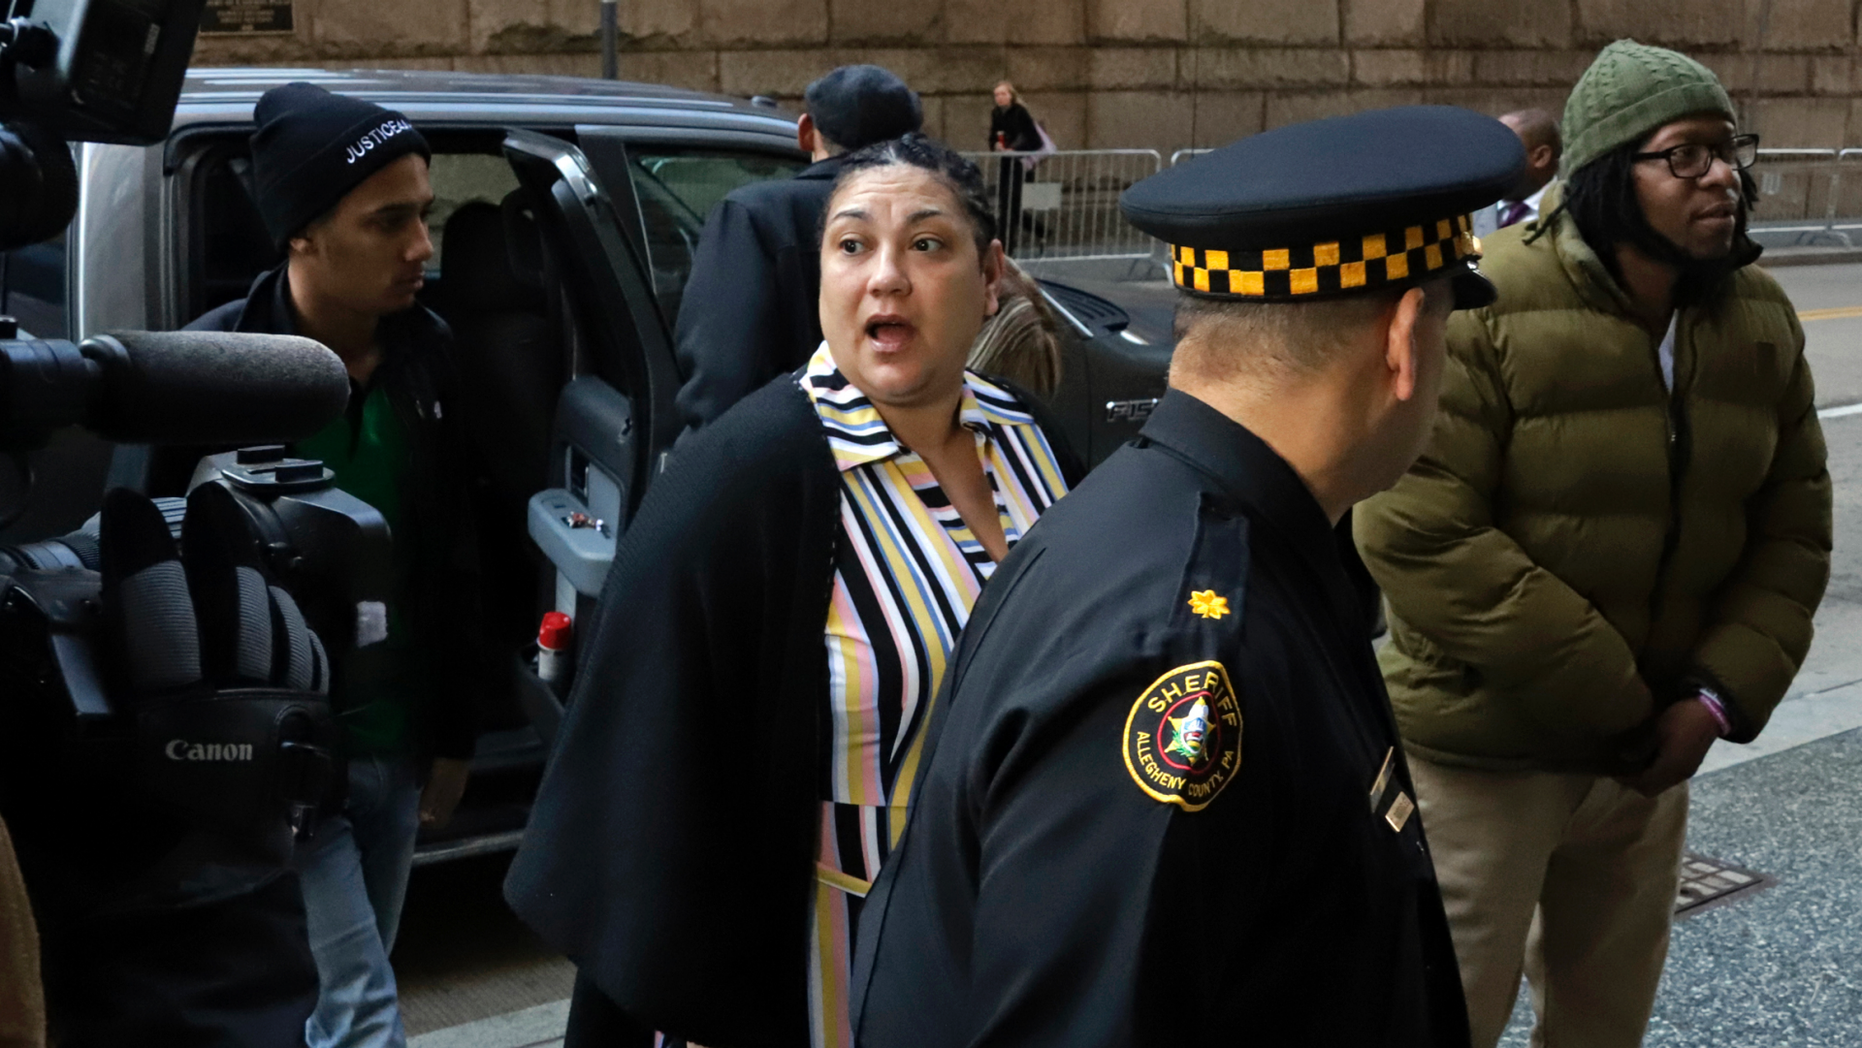 Michelle Kenney, center, mother of Antwon Rose II, arrives at Allegheny County Courthouse with supporters on the second day of the trial of Michael Rosfeld, former East Pittsburgh Police Officer ( Pennsylvania), Wednesday, March 20, 2019. Rosfeld is accused of homicide for the fatal killing of Antwon Rose II during the shootout during the traffic disruption on June 19, 2018. (Photo AP / Gene J. Puskar)